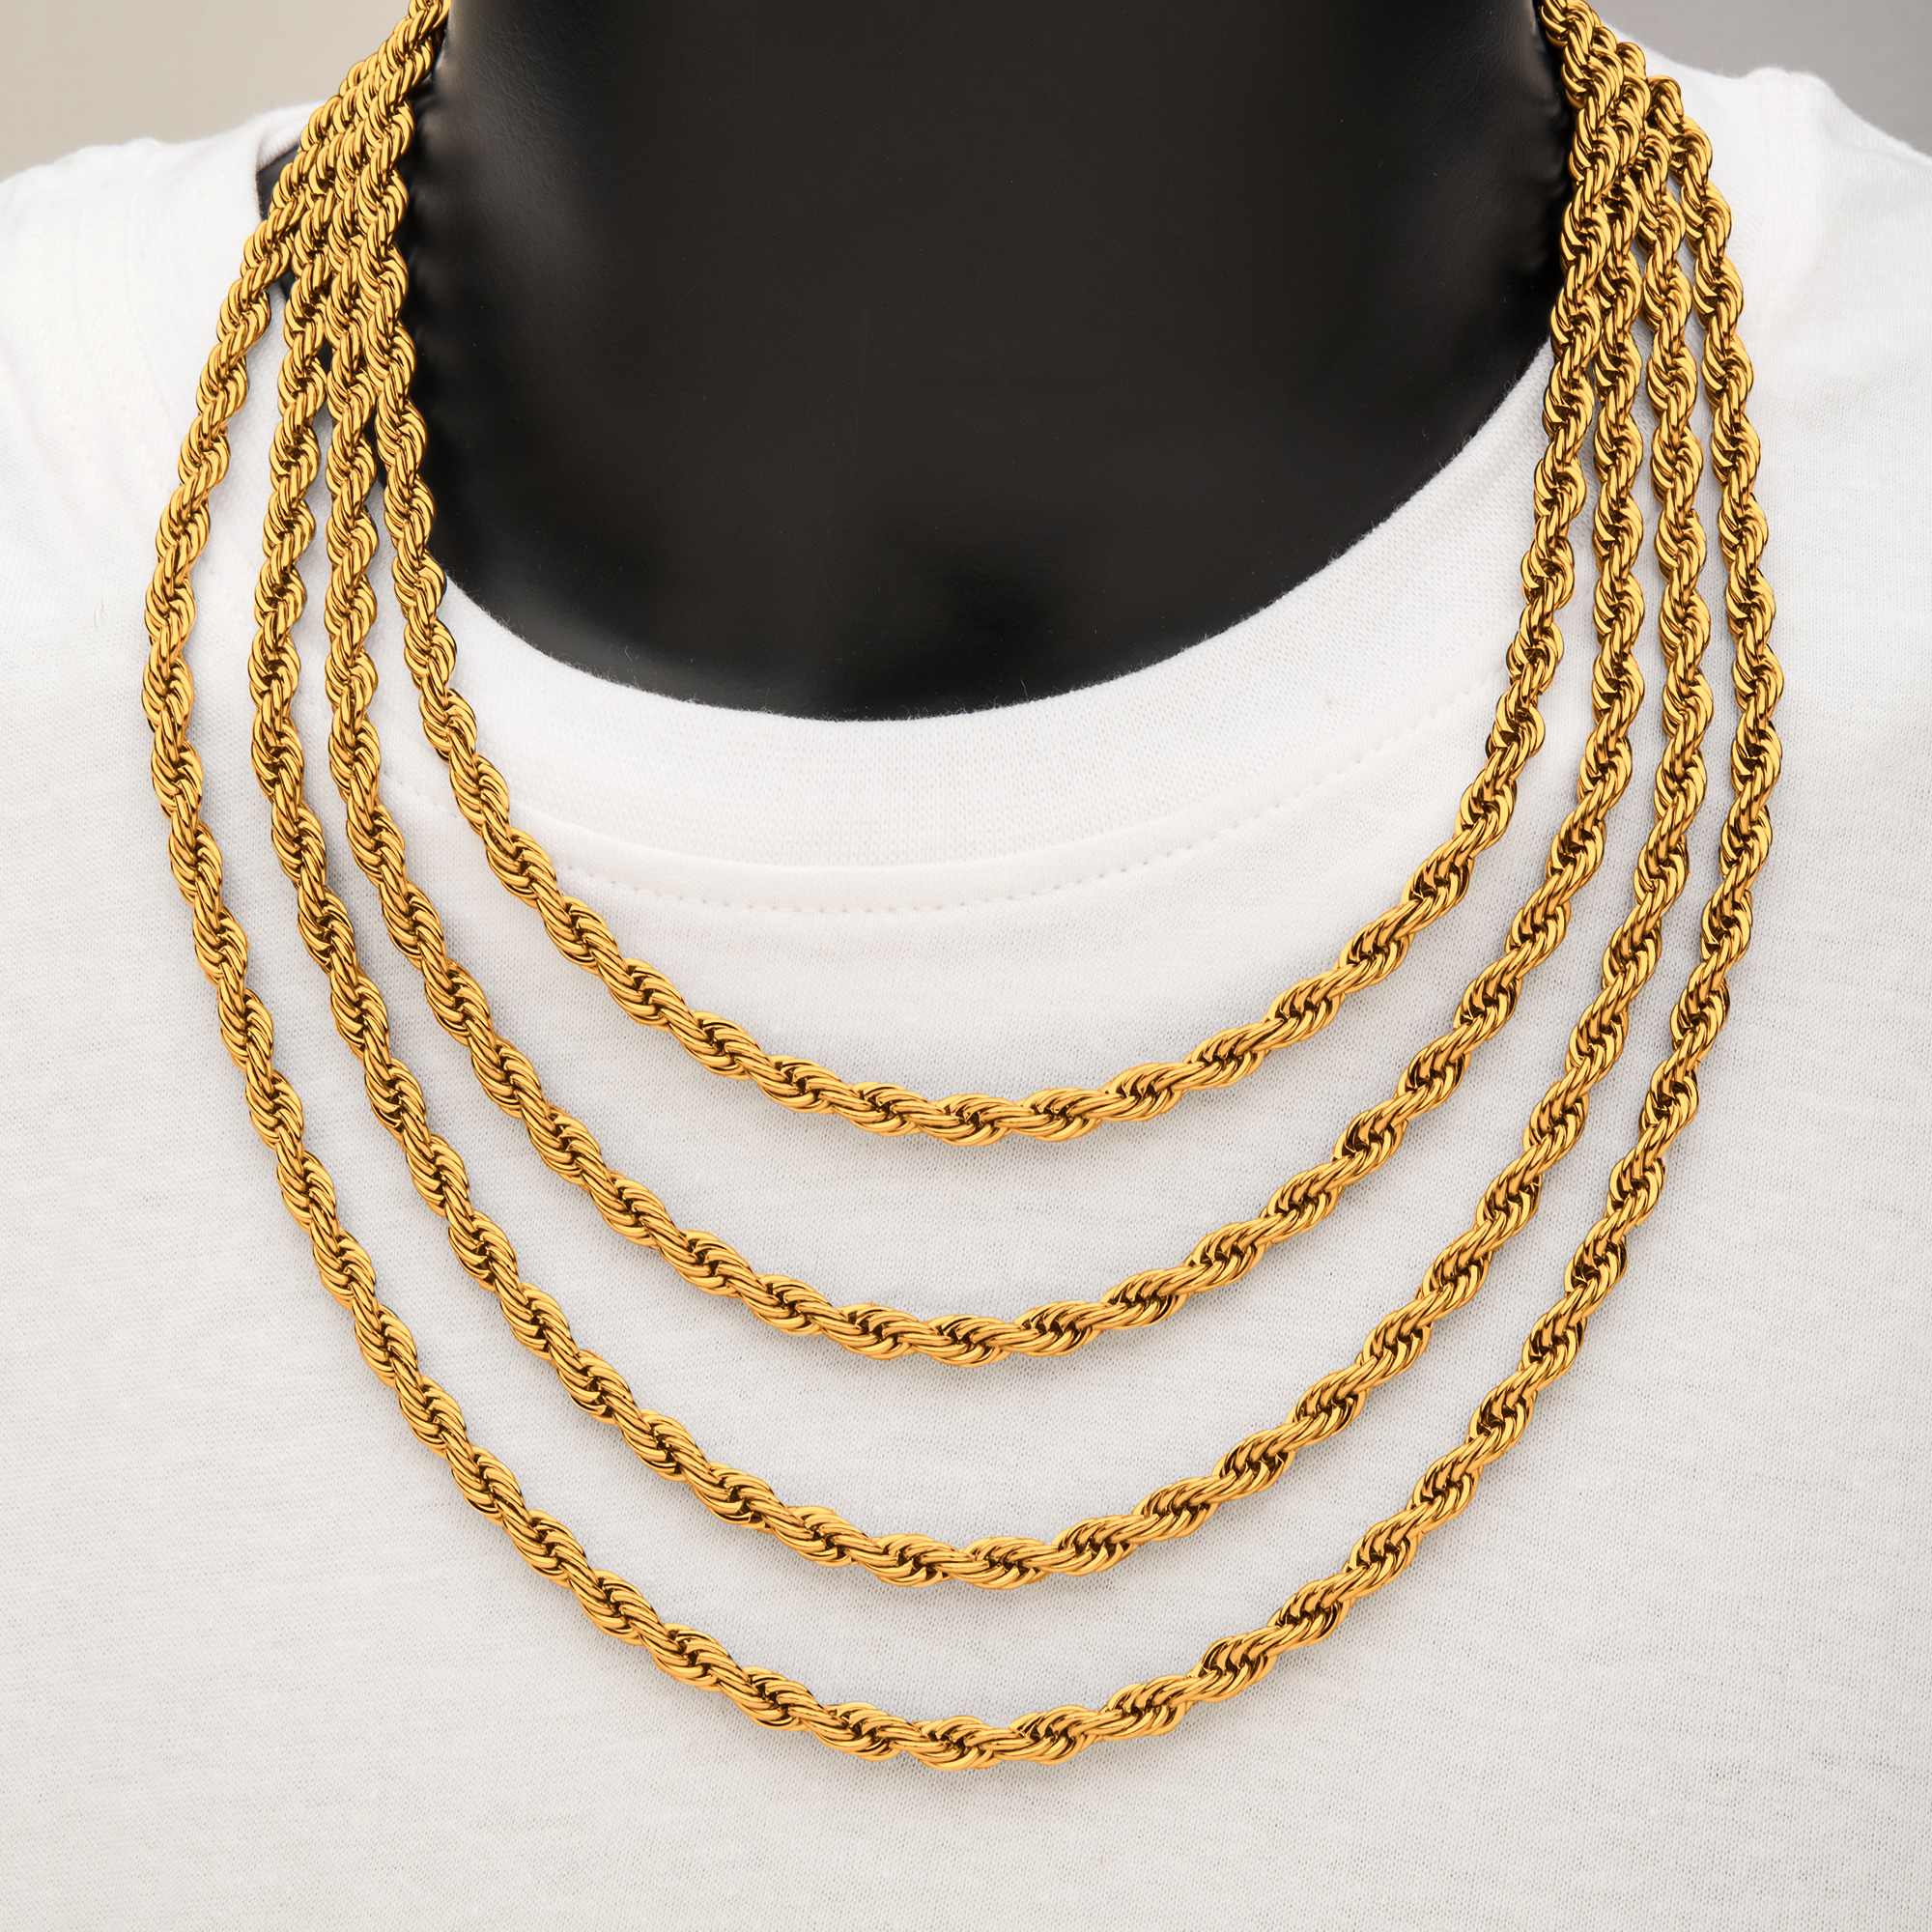 6mm 18K Gold Plated Rope Chain Image 2 Lewis Jewelers, Inc. Ansonia, CT